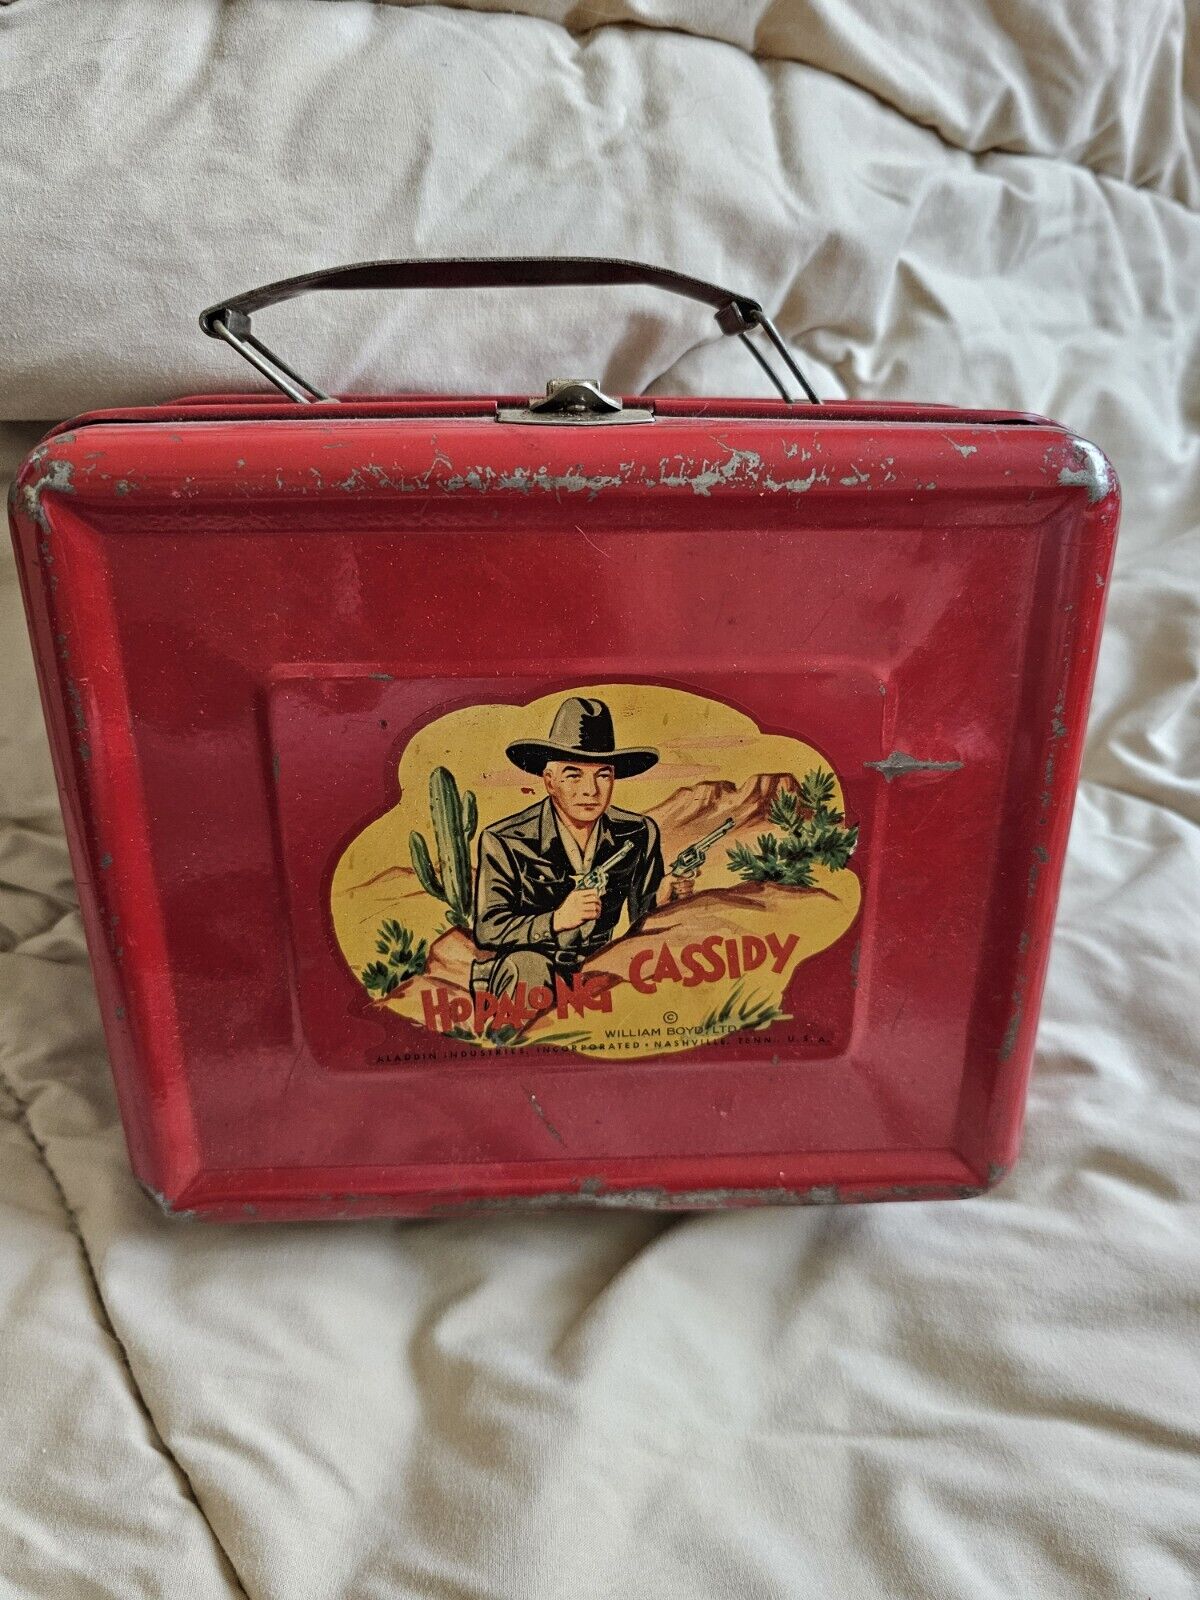 Vintage Metal Hopalong Cassidy lunch box by Aladdin Industries 1950s No Thermos